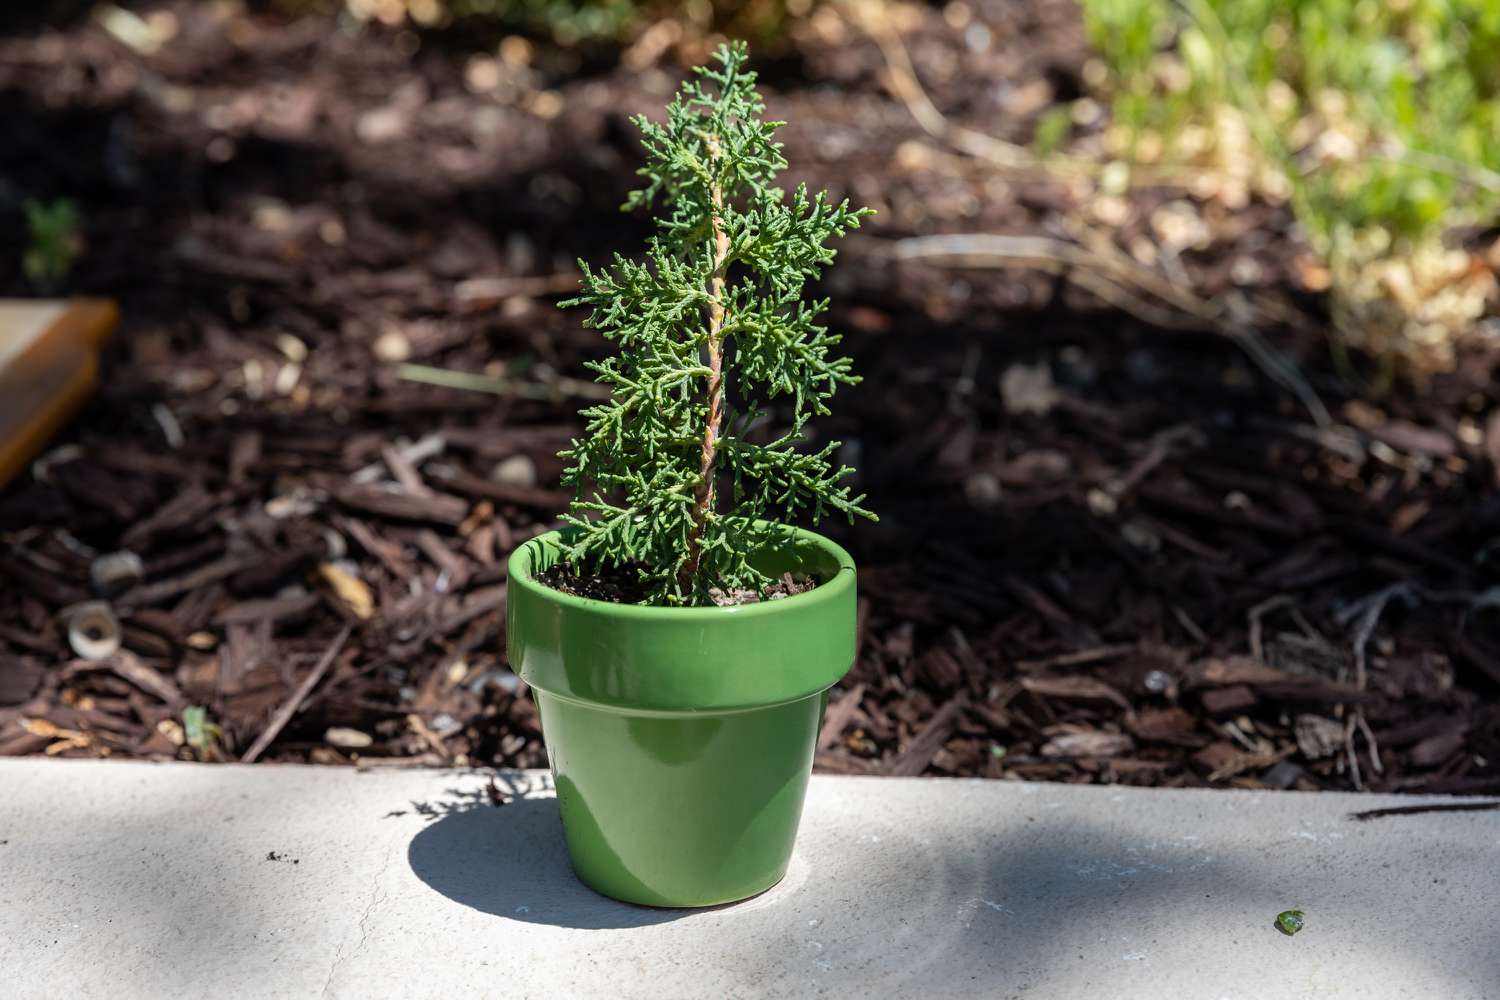 Western juniper sapling planted in small green pot outside on cement